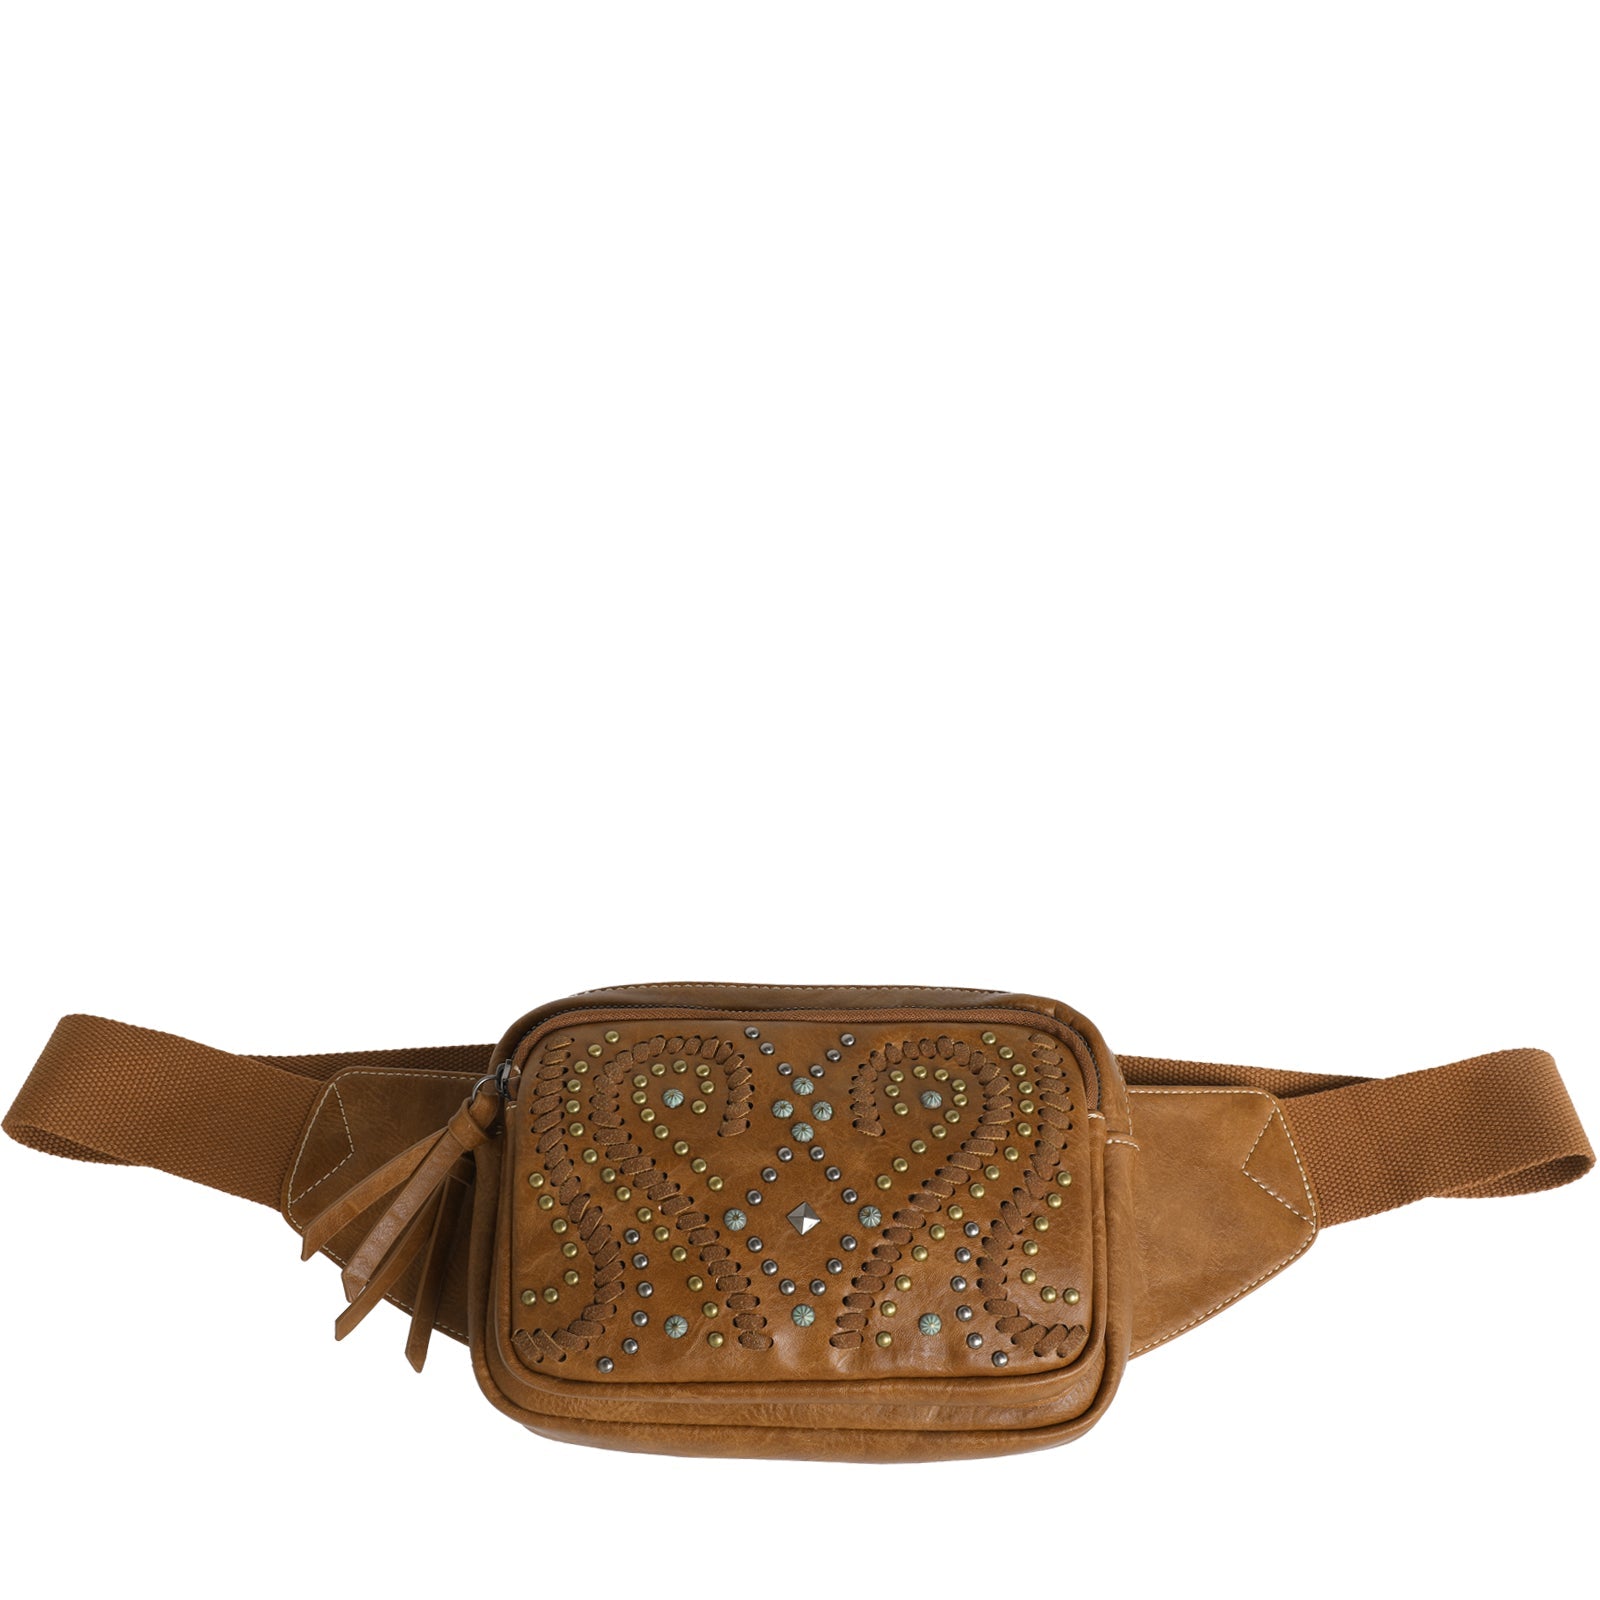 Montana West Whipstitch Collection Fanny Pack - Montana West World